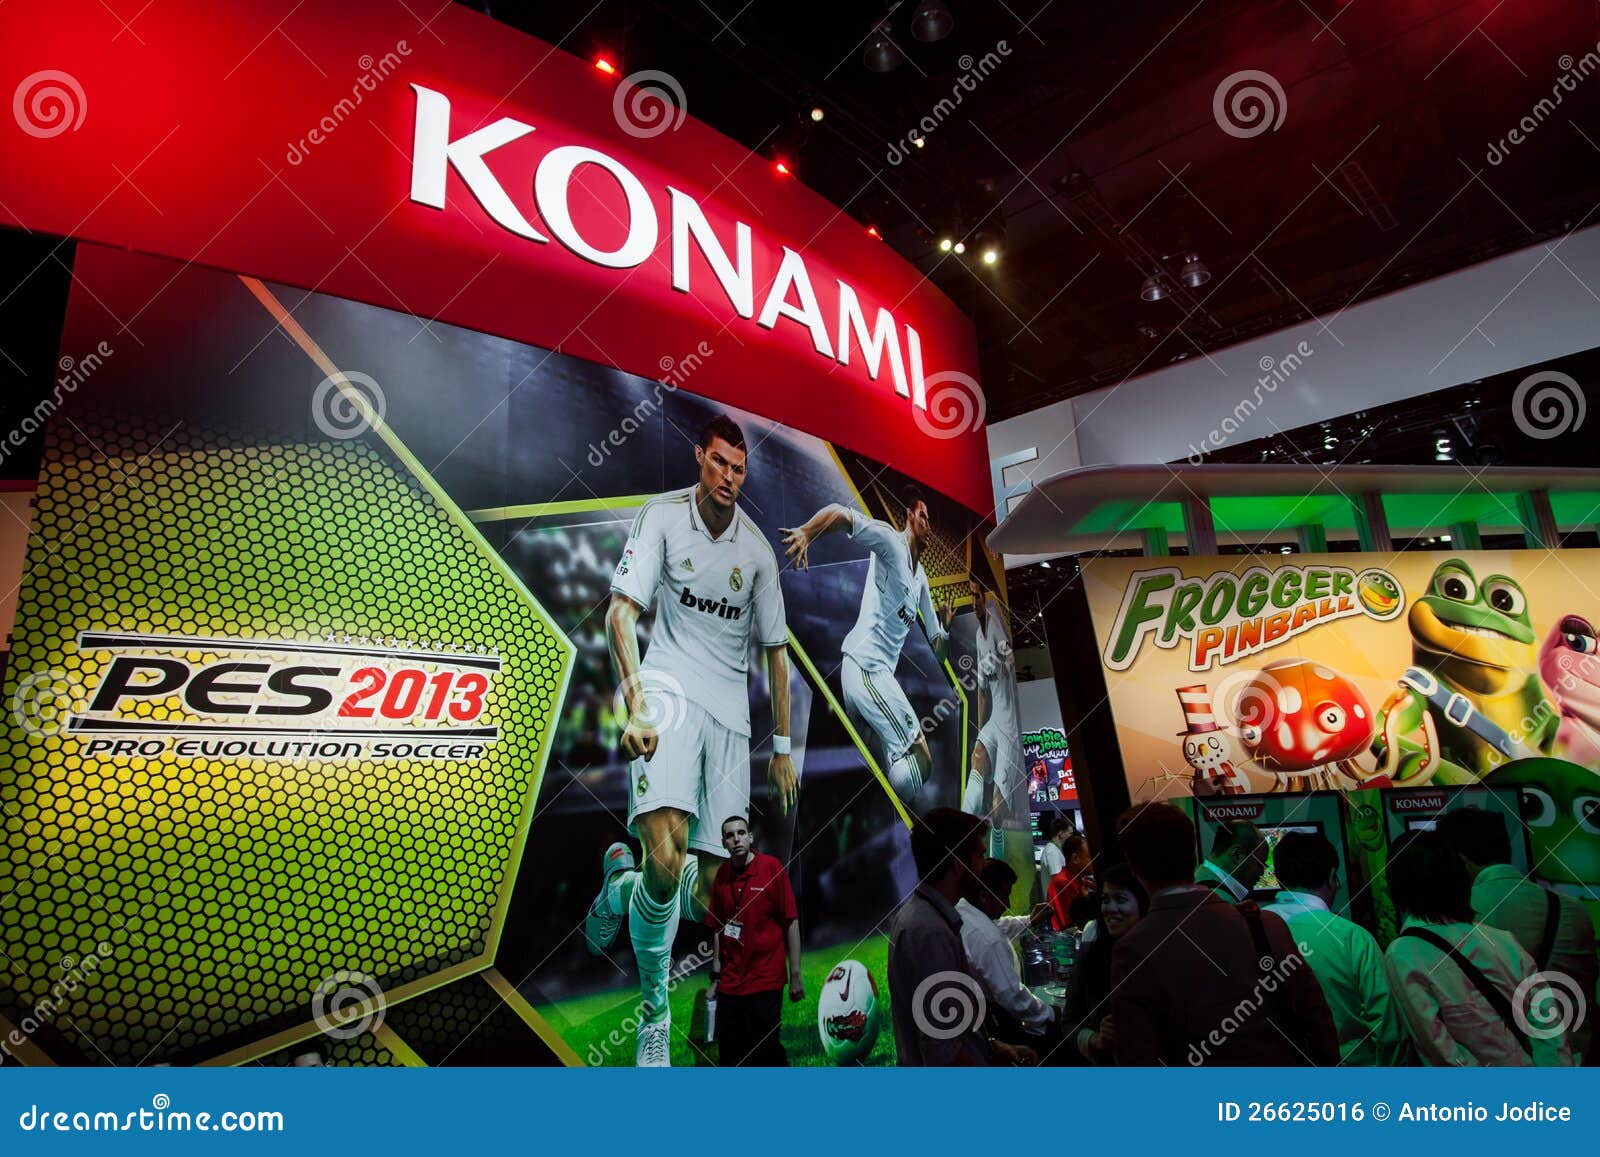 49 Pro Evolution Soccer Images, Stock Photos, 3D objects